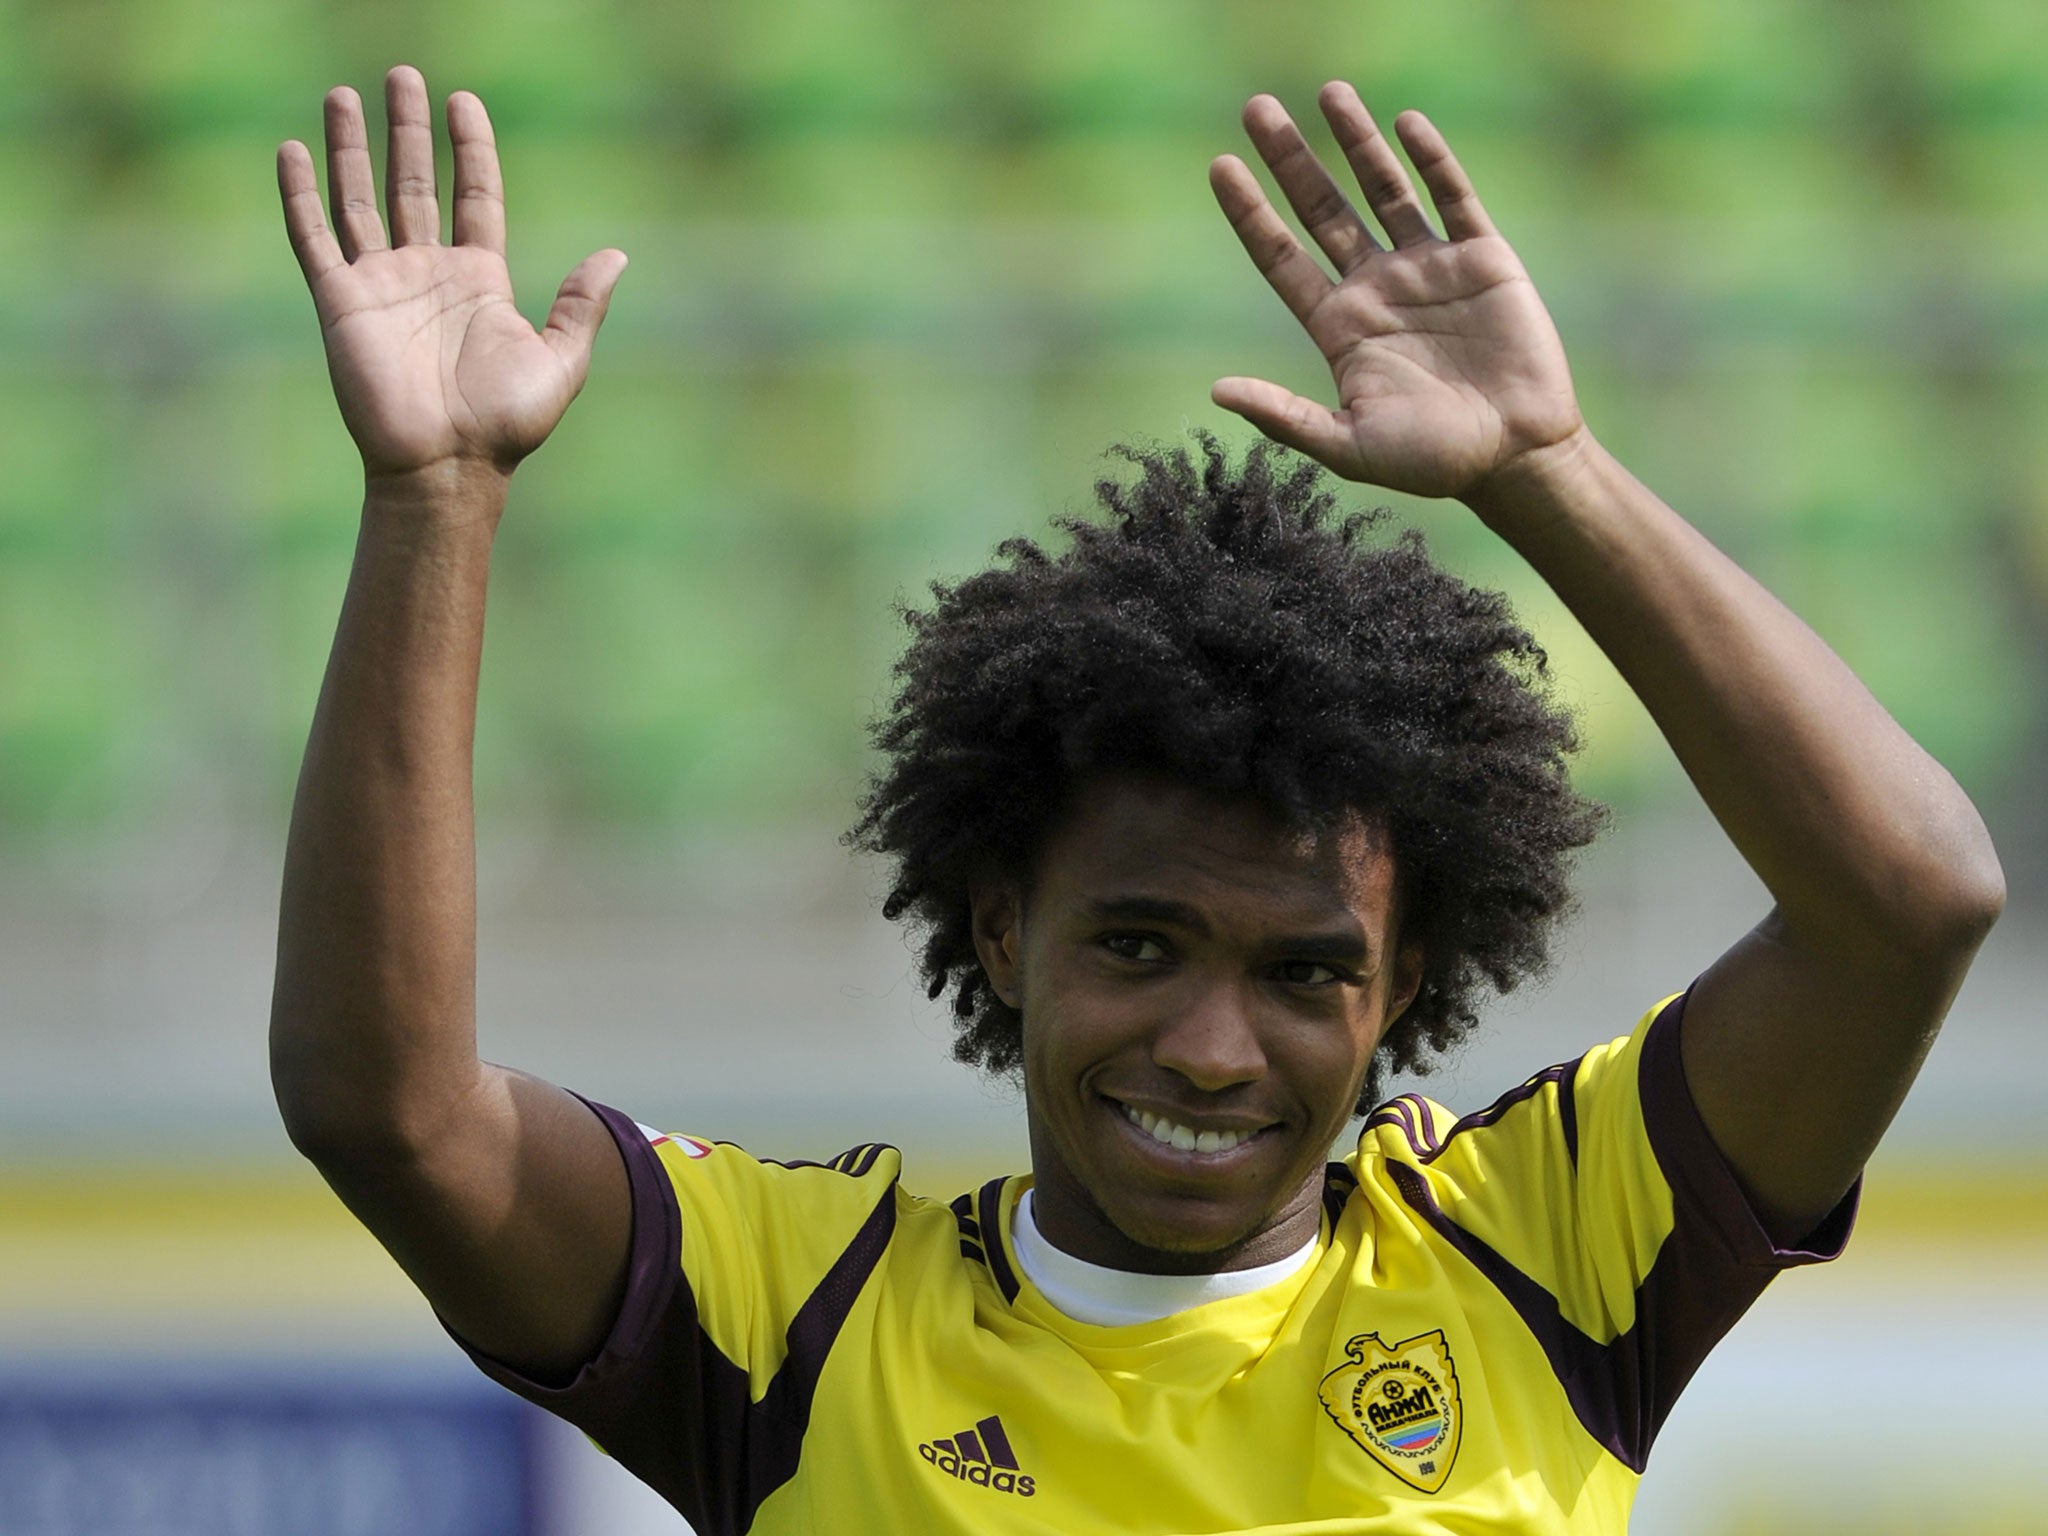 Willian is expected to sign for Chelsea after having a Spurs medical